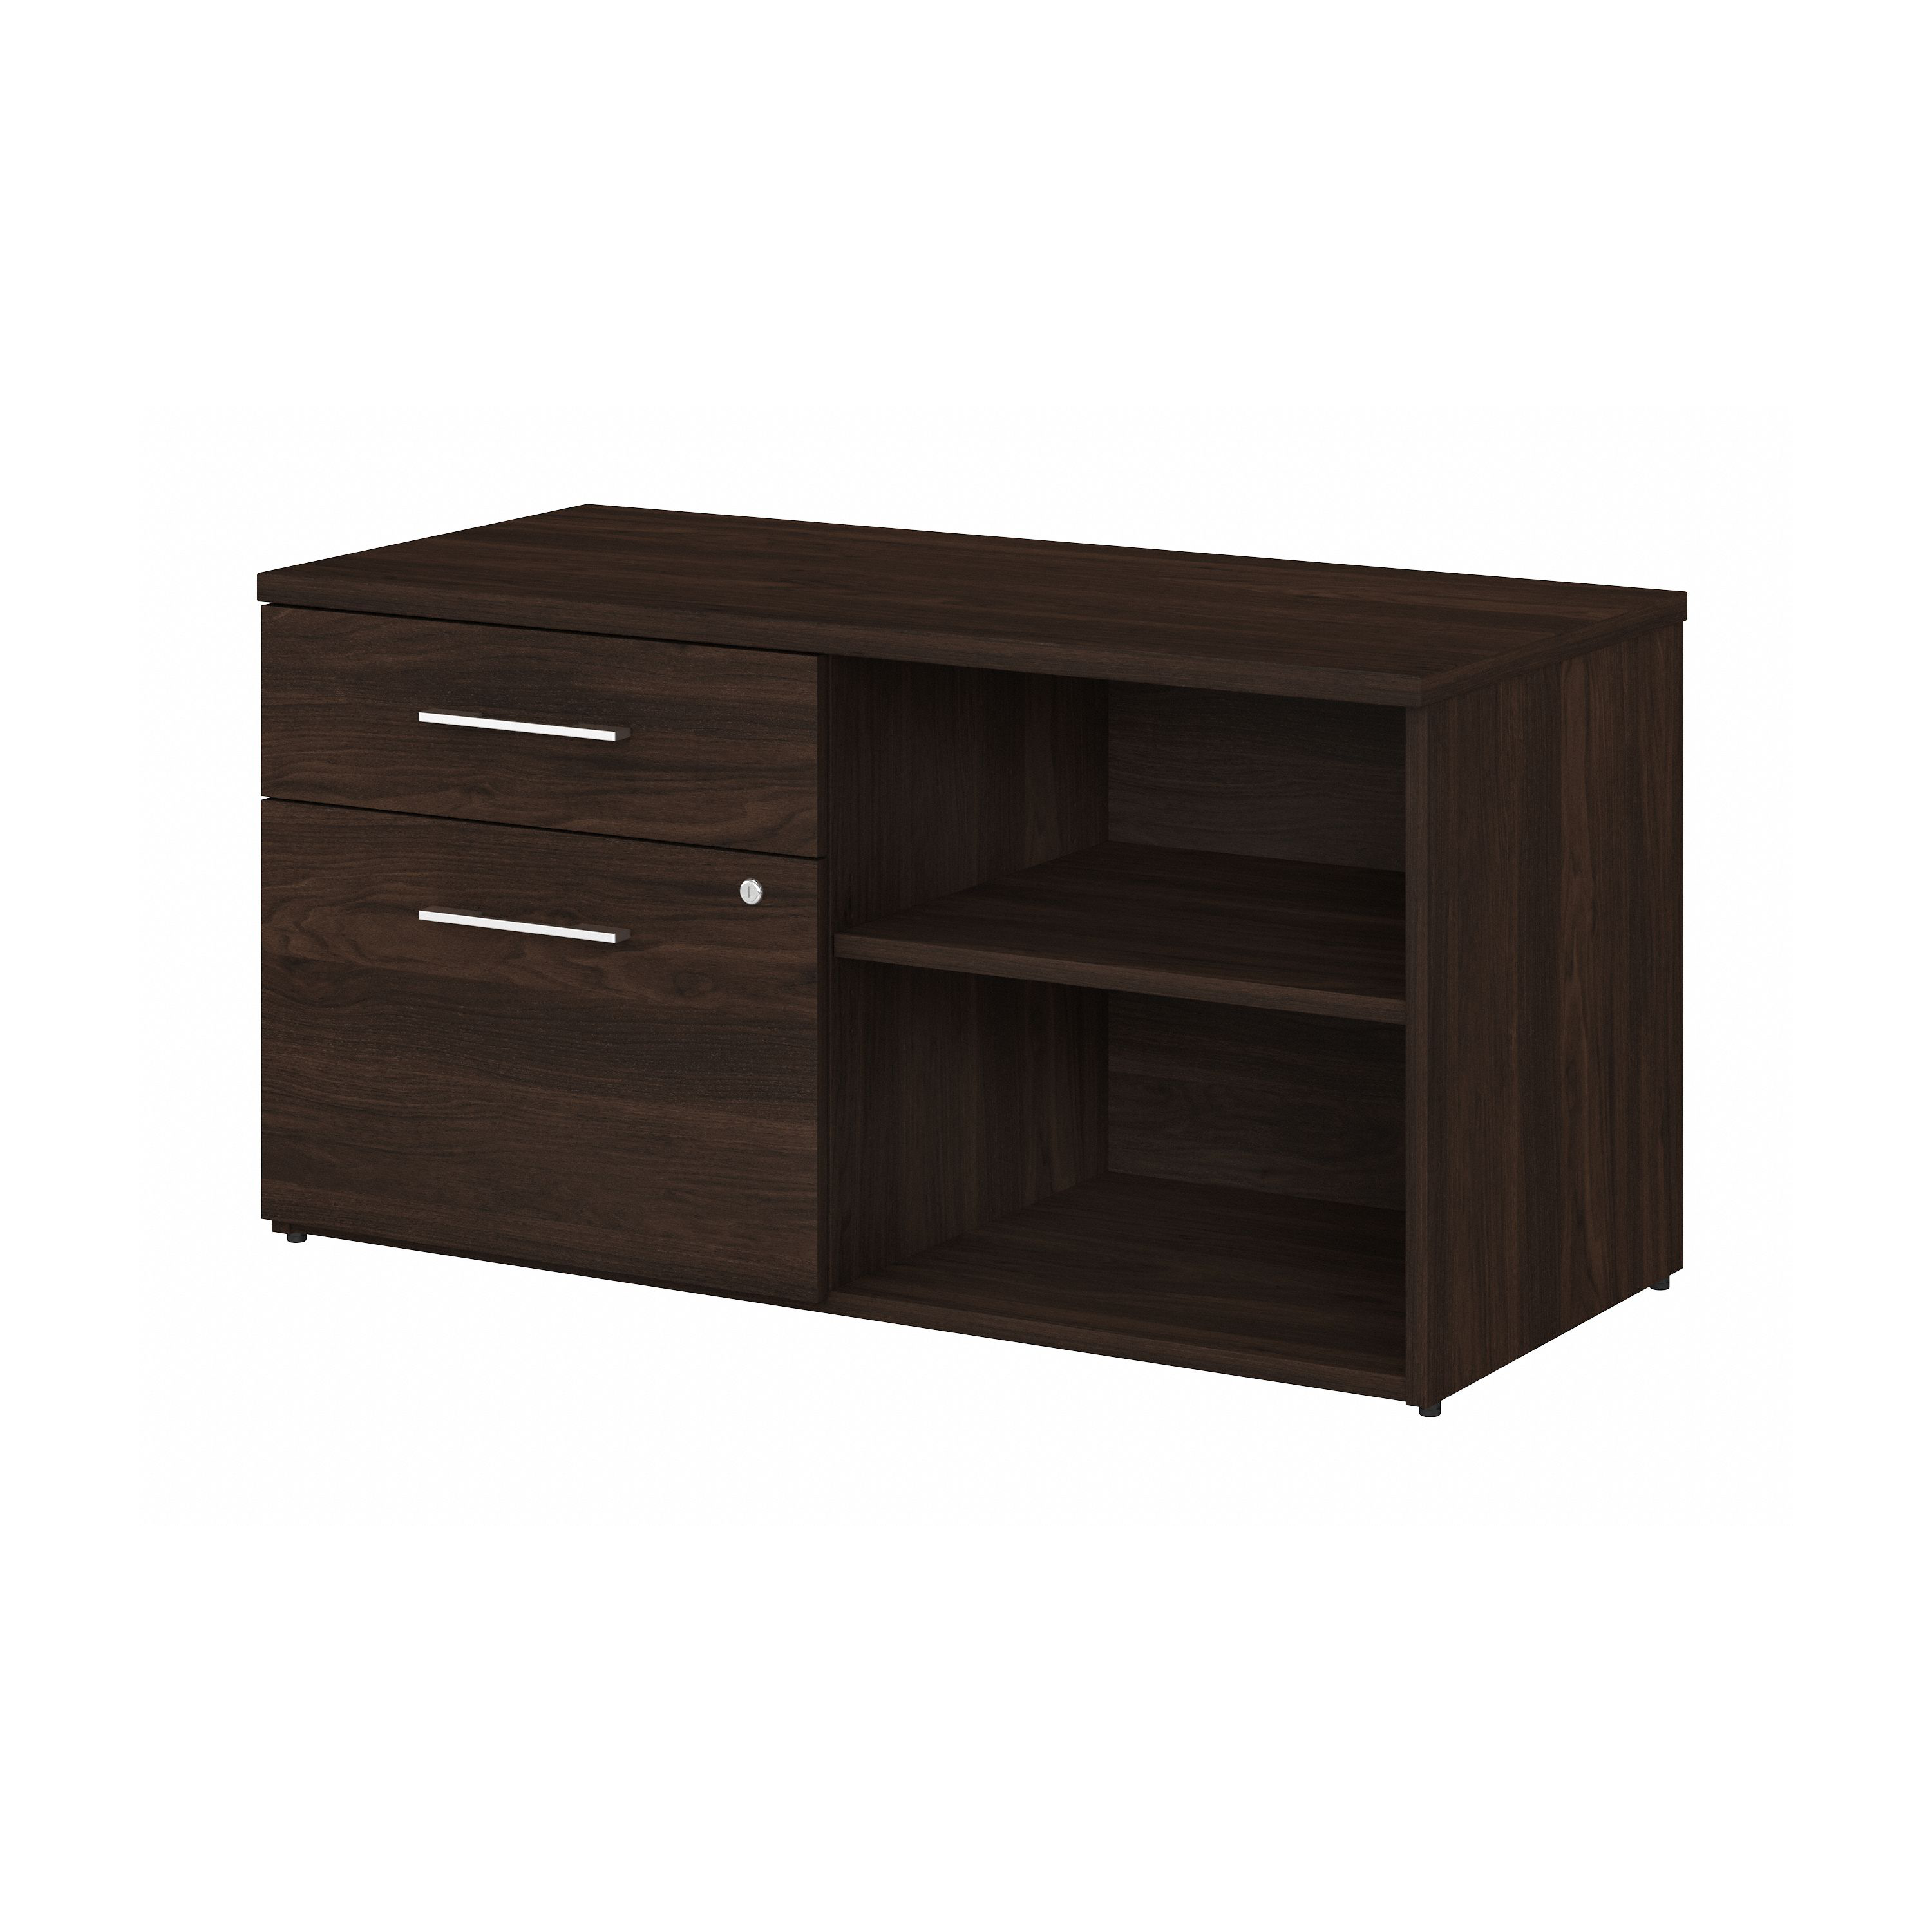 Shop Bush Business Furniture Office 500 Low Storage Cabinet with Drawers and Shelves 02 OFS145BW #color_black walnut